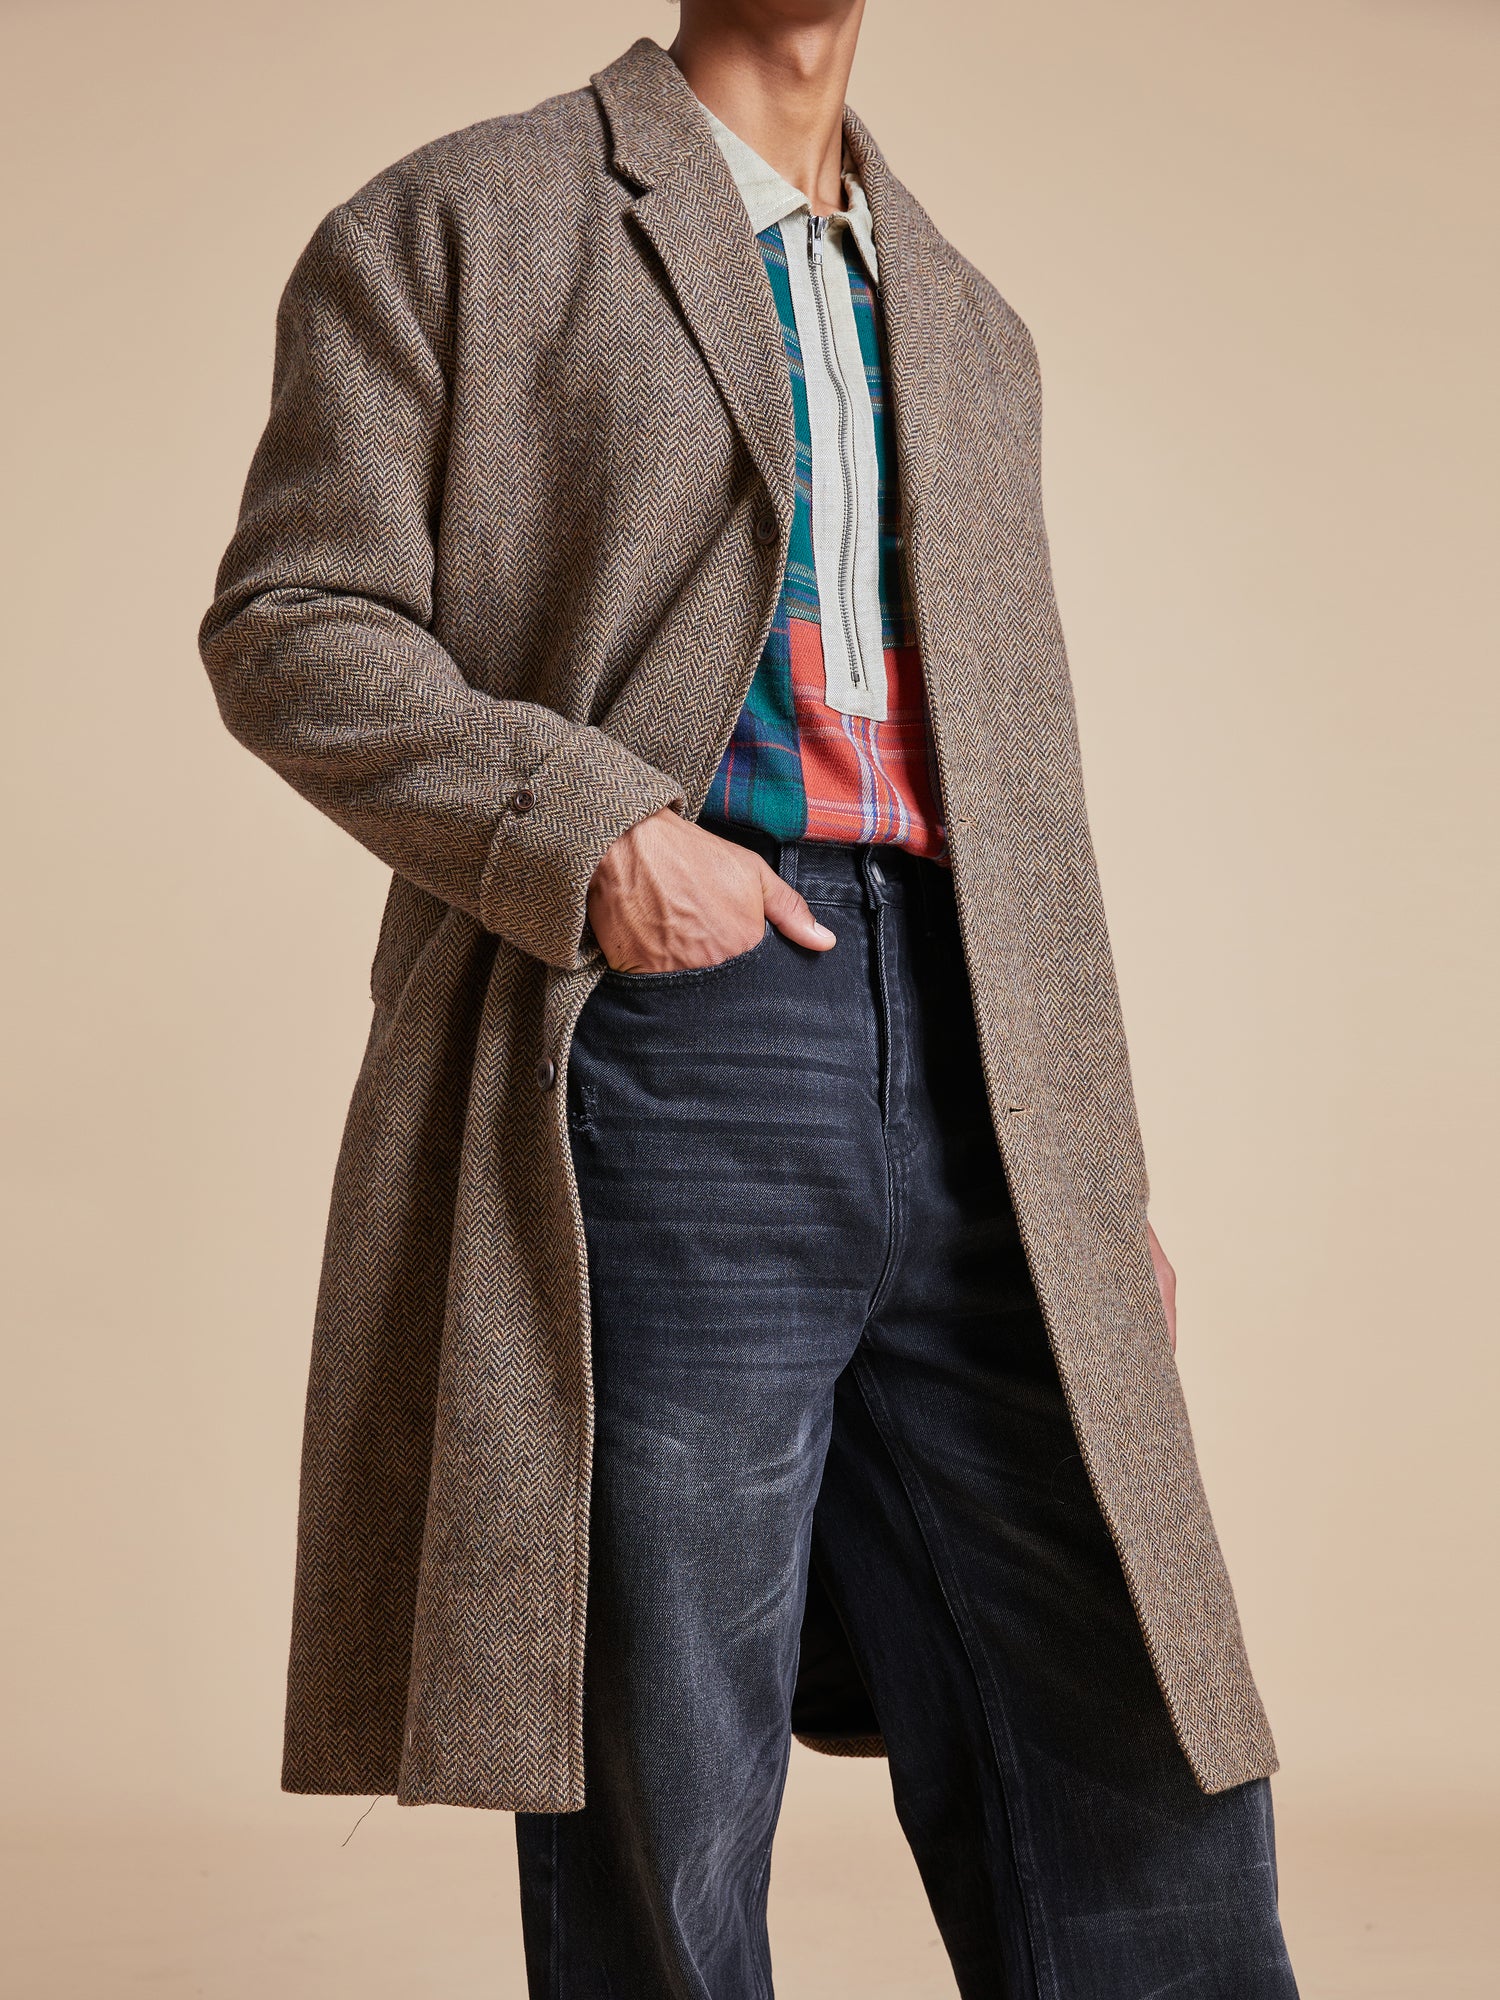 A man wearing a Found Elm Tweed Long Top Coat and jeans.